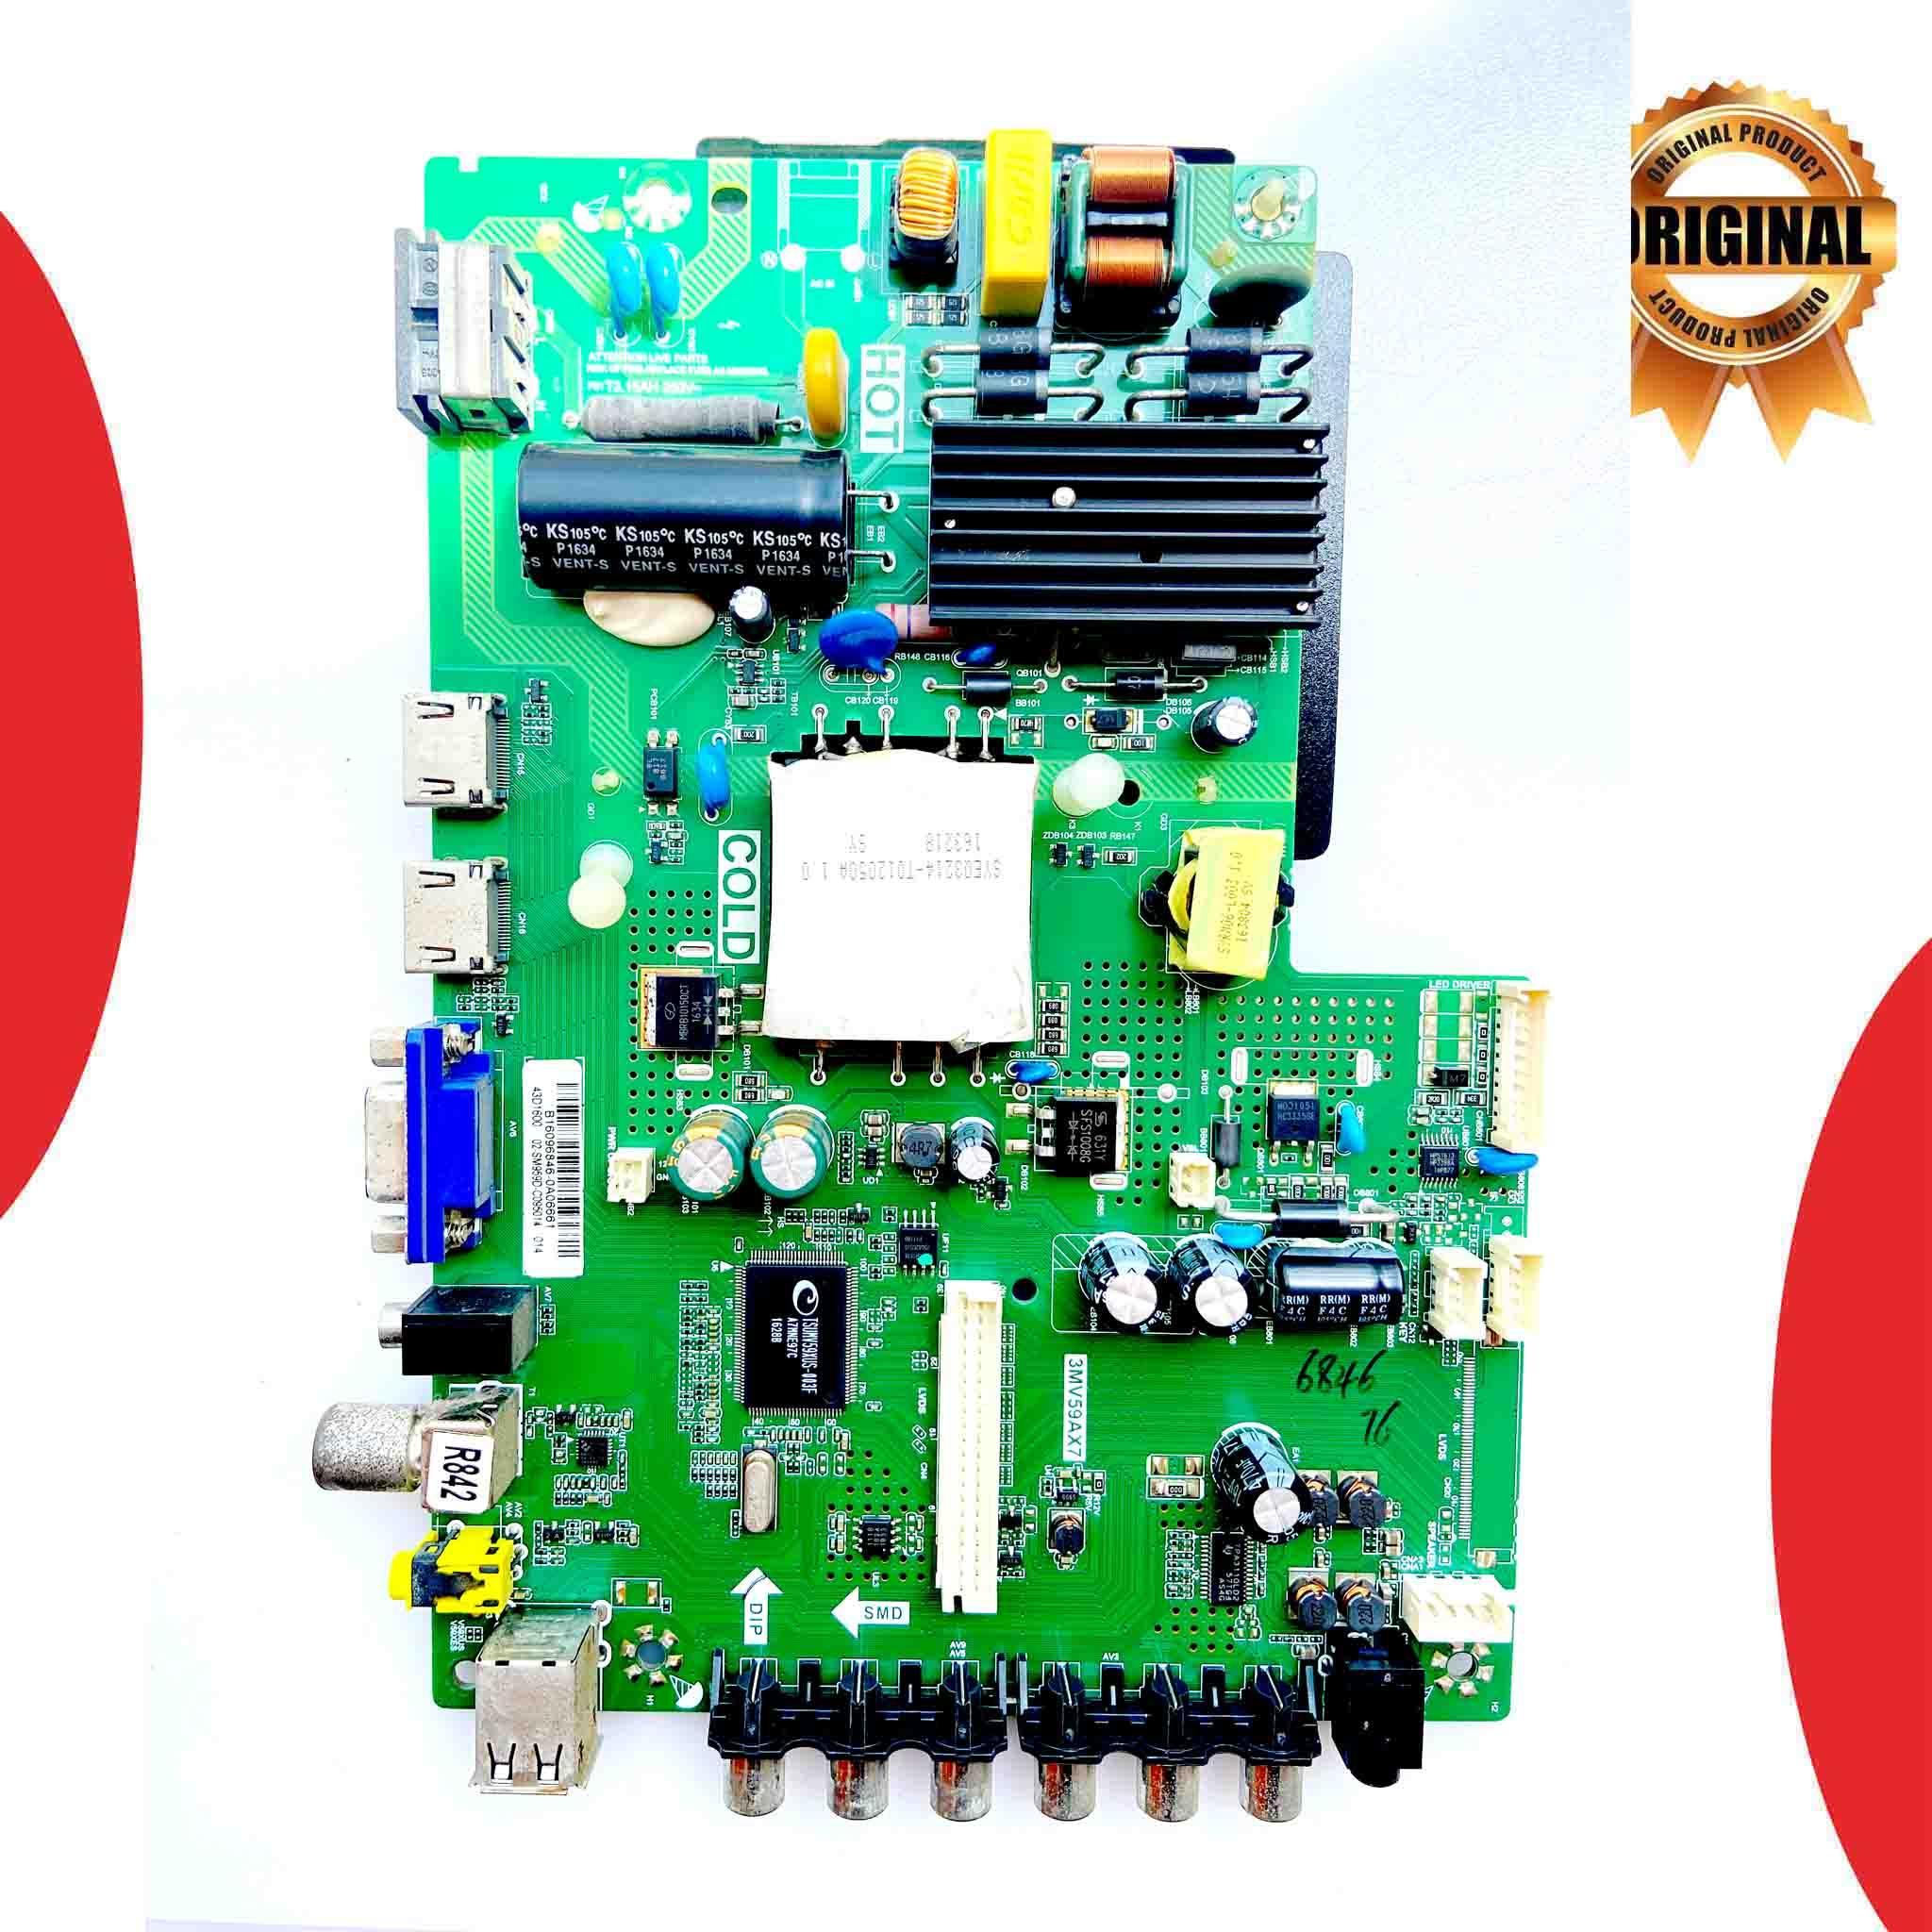 Sanyo 42 inch LED TV Motherboard for Model XT42S7100F - Great Bharat Electronics